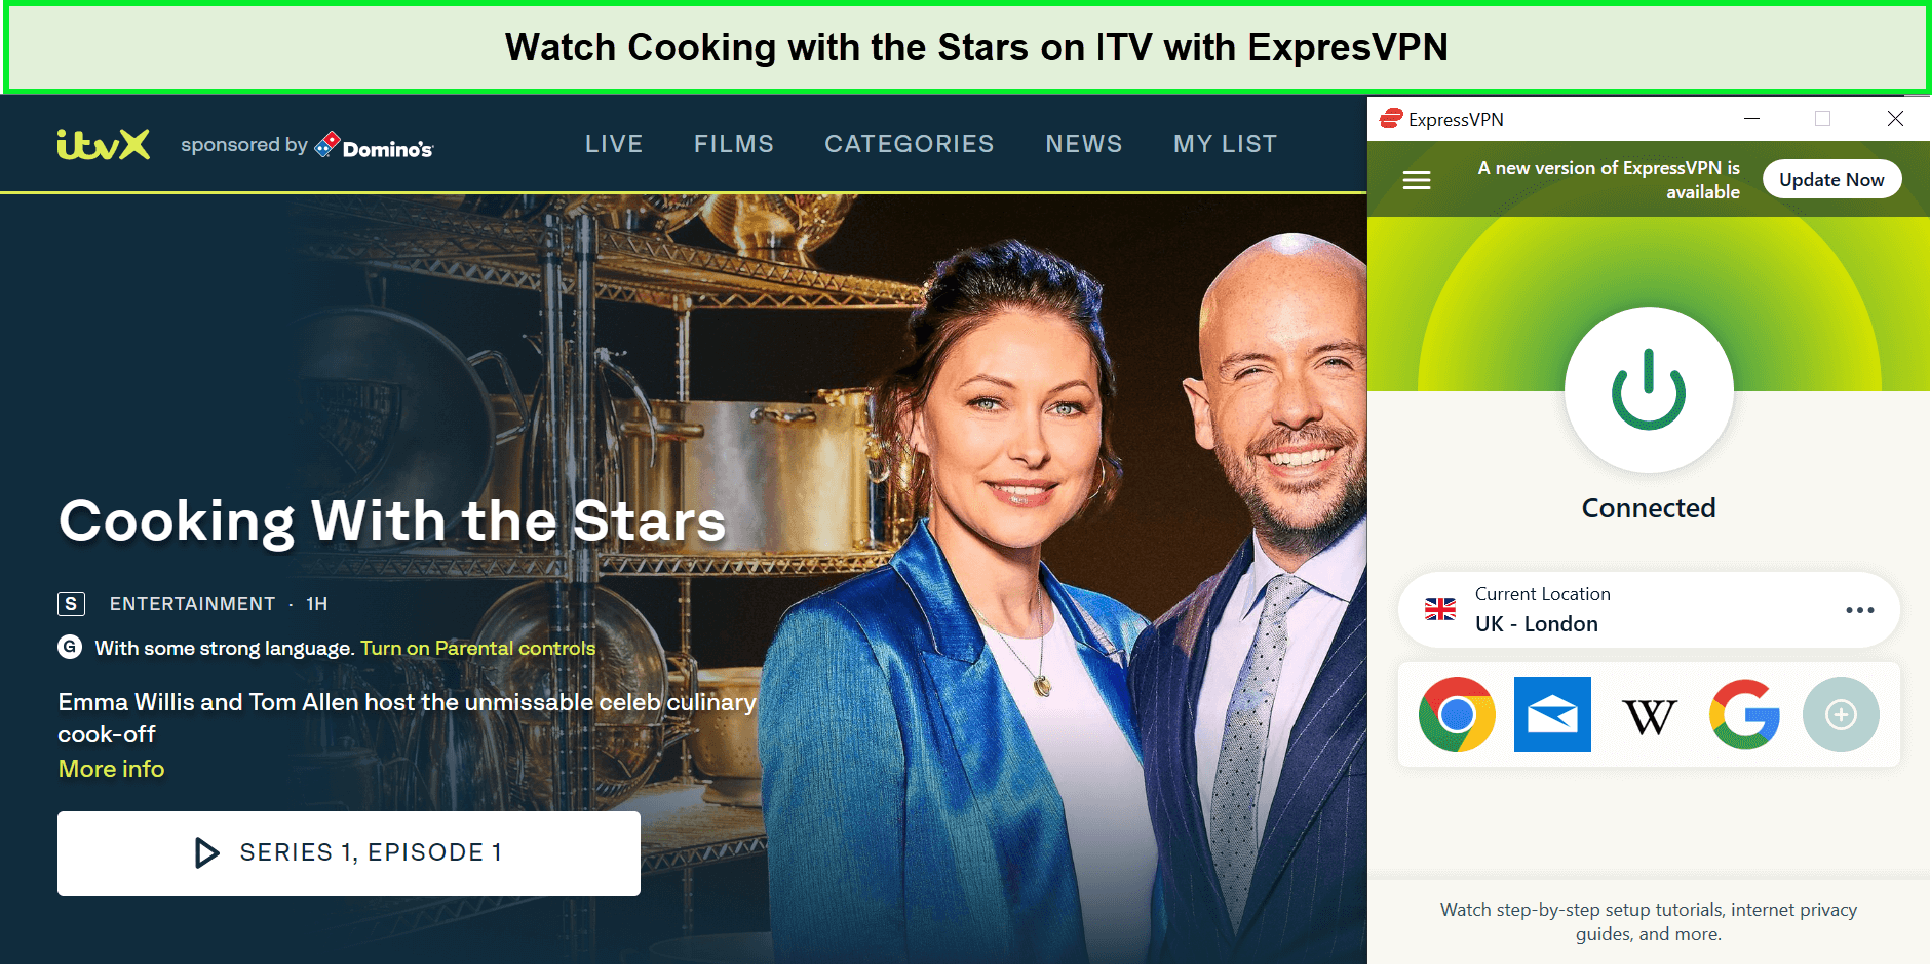 Watch-Cooking-with-the-Stars-Season-3-in-Singapore-on-ITV-with-ExpresVPN